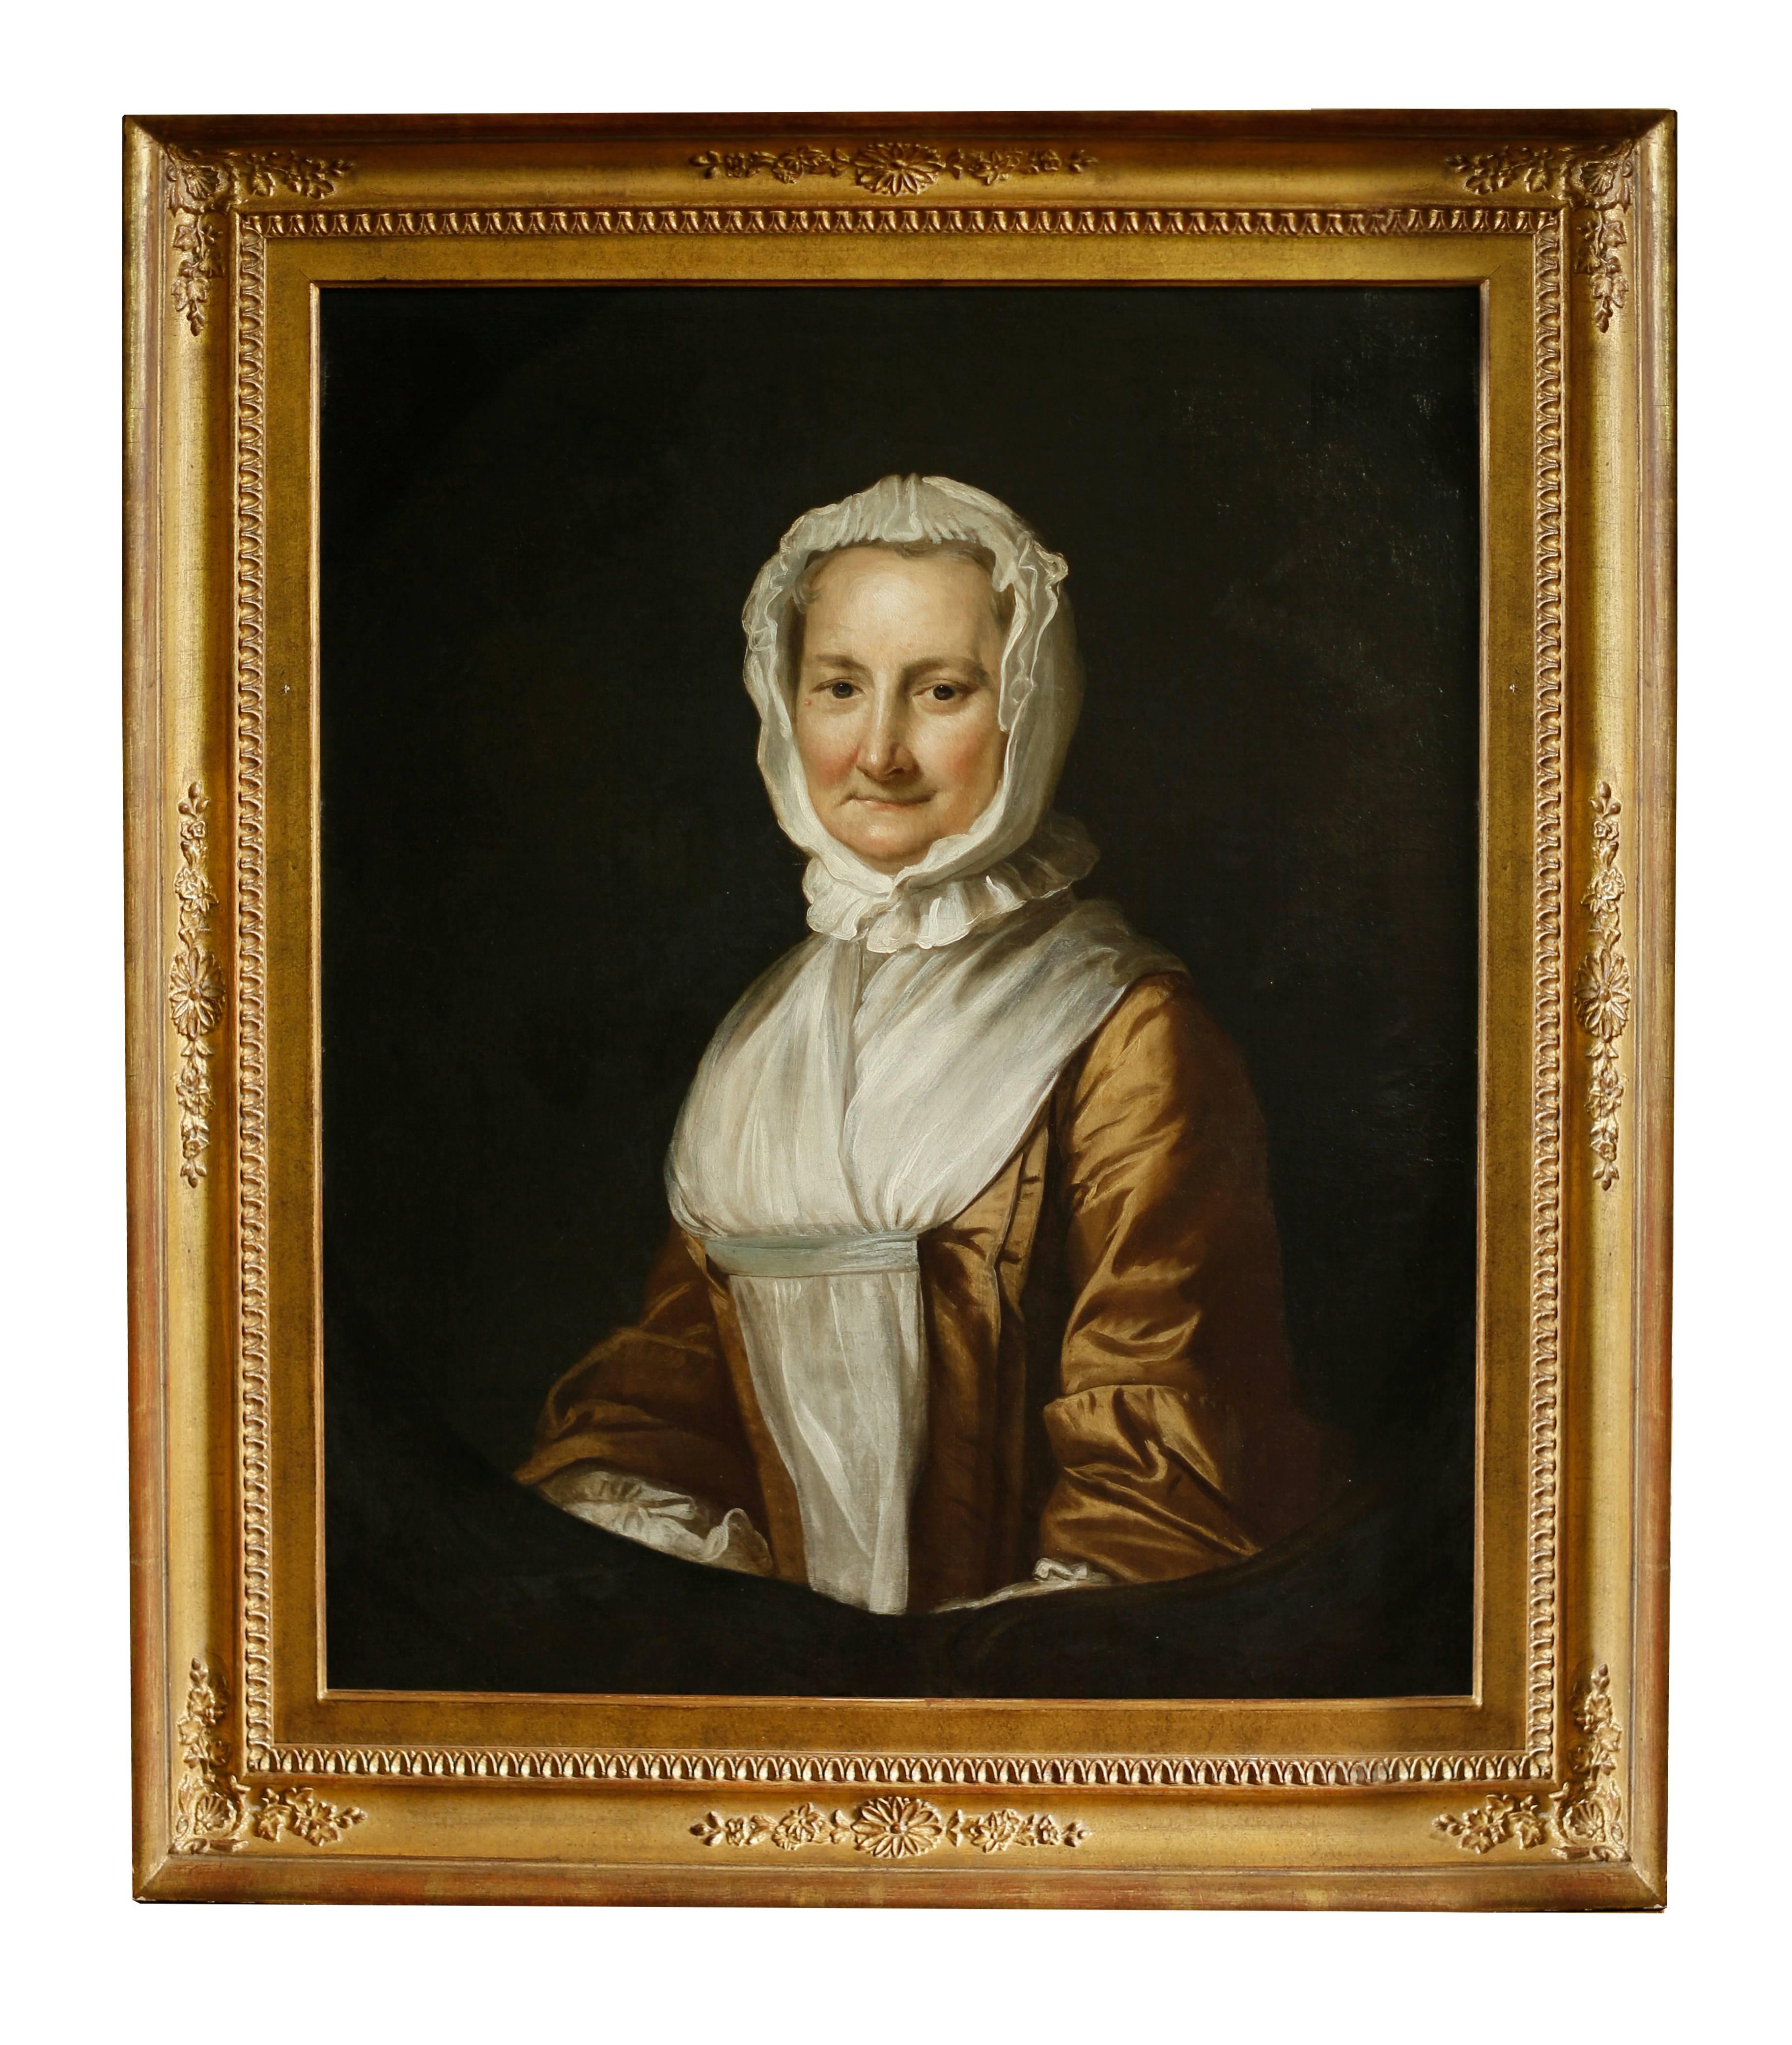 An attractive pair of colonial American mid-18th century oil on canvas portraits. The detail and rendering of the paintings is of extremely fine quality. Highly contrasted figures against the dark backgrounds references the earlier work of